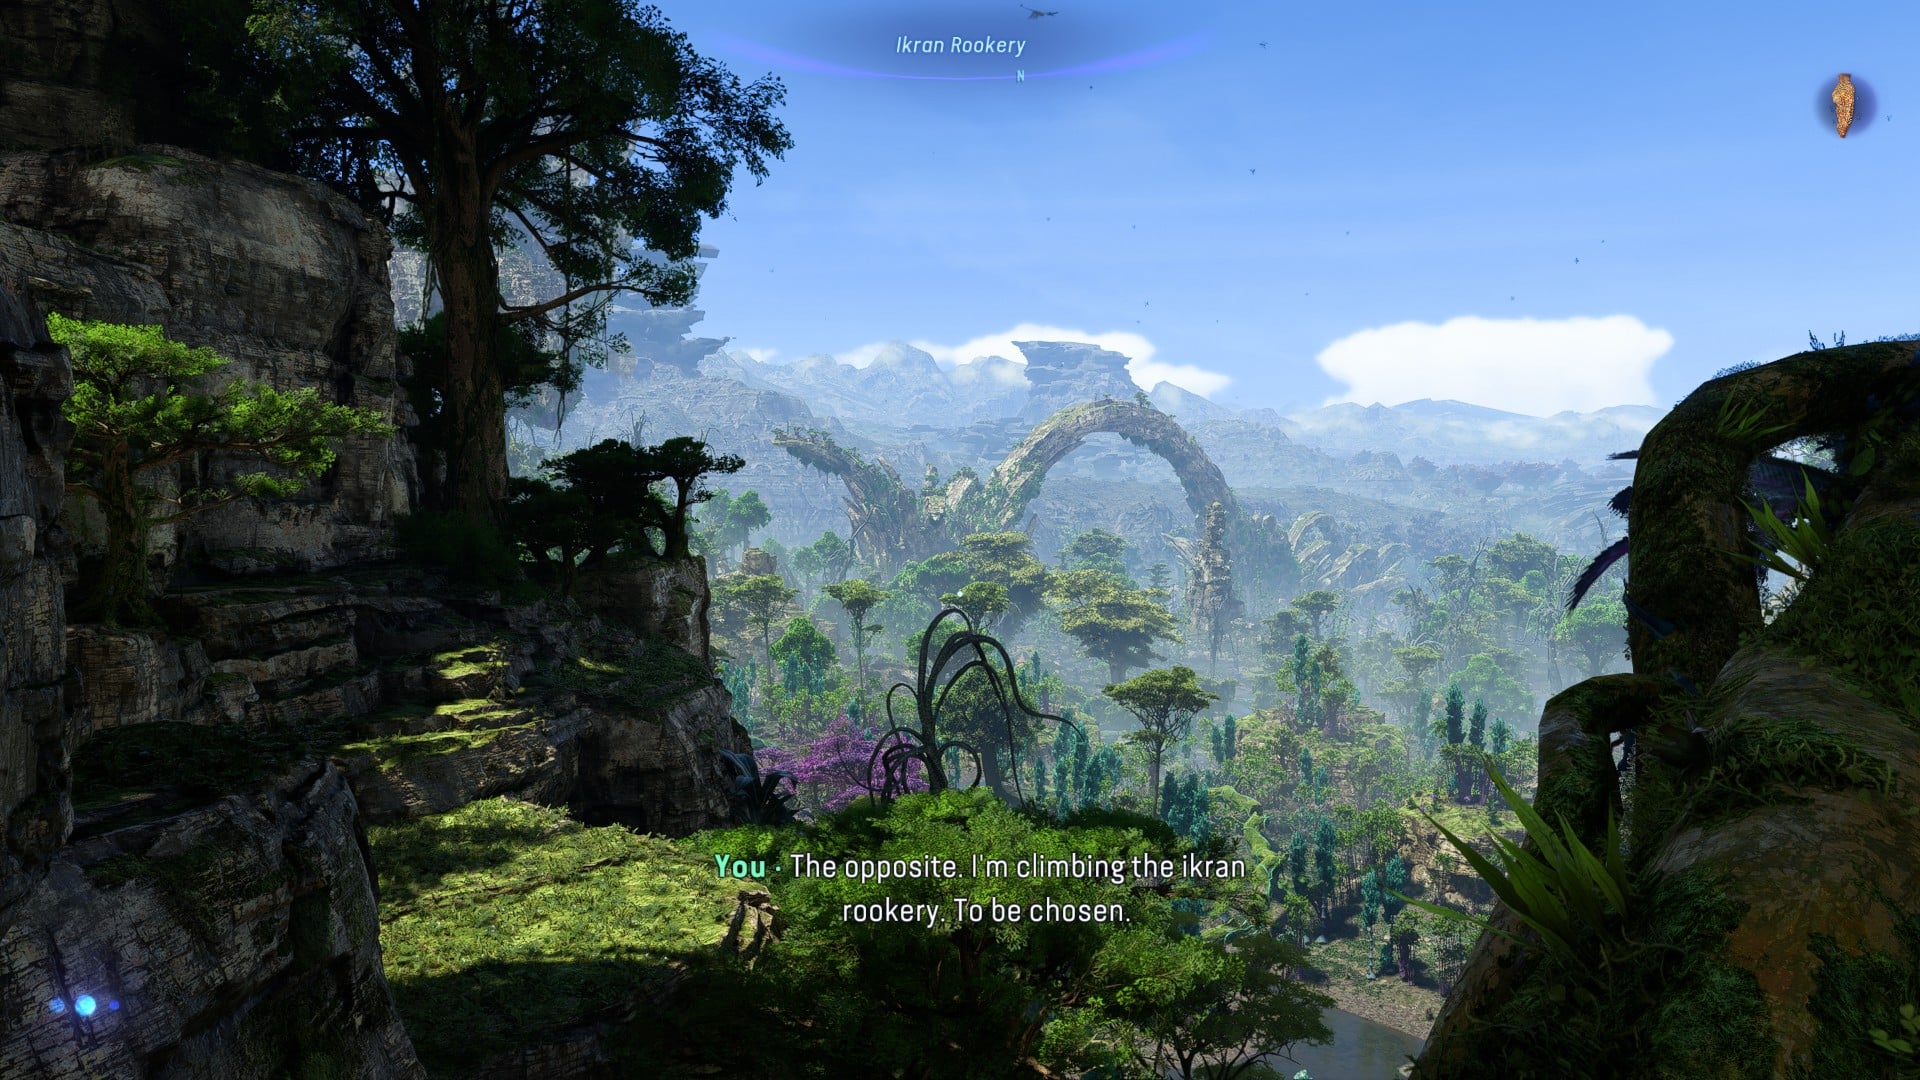 In-game screenshot of the game where the player has to go to the Ikran Rookery